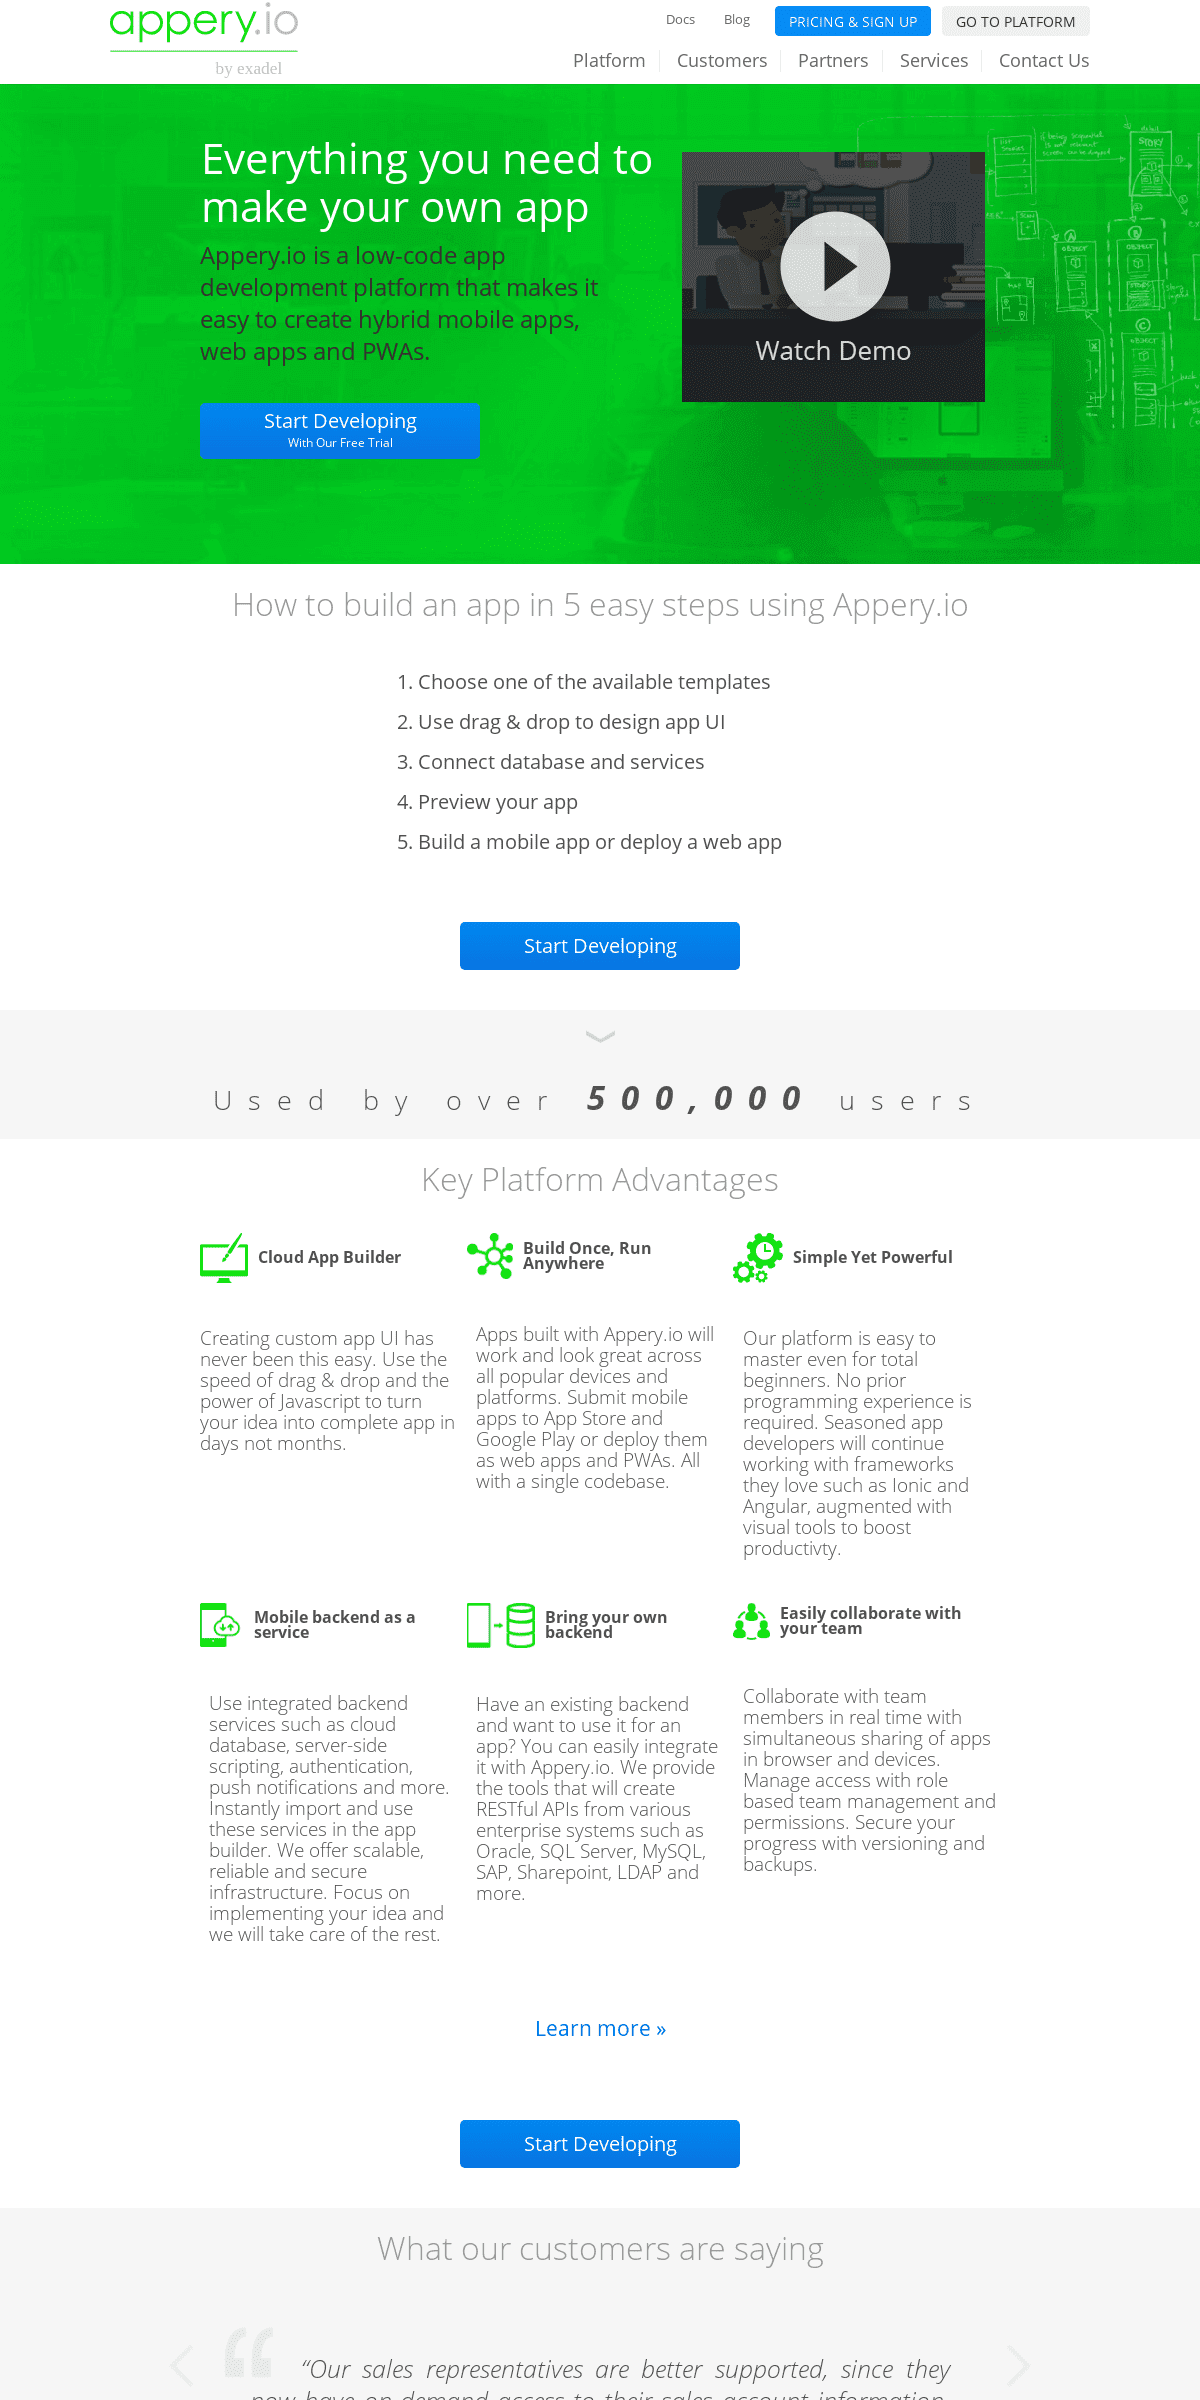 A complete backup of appery.io